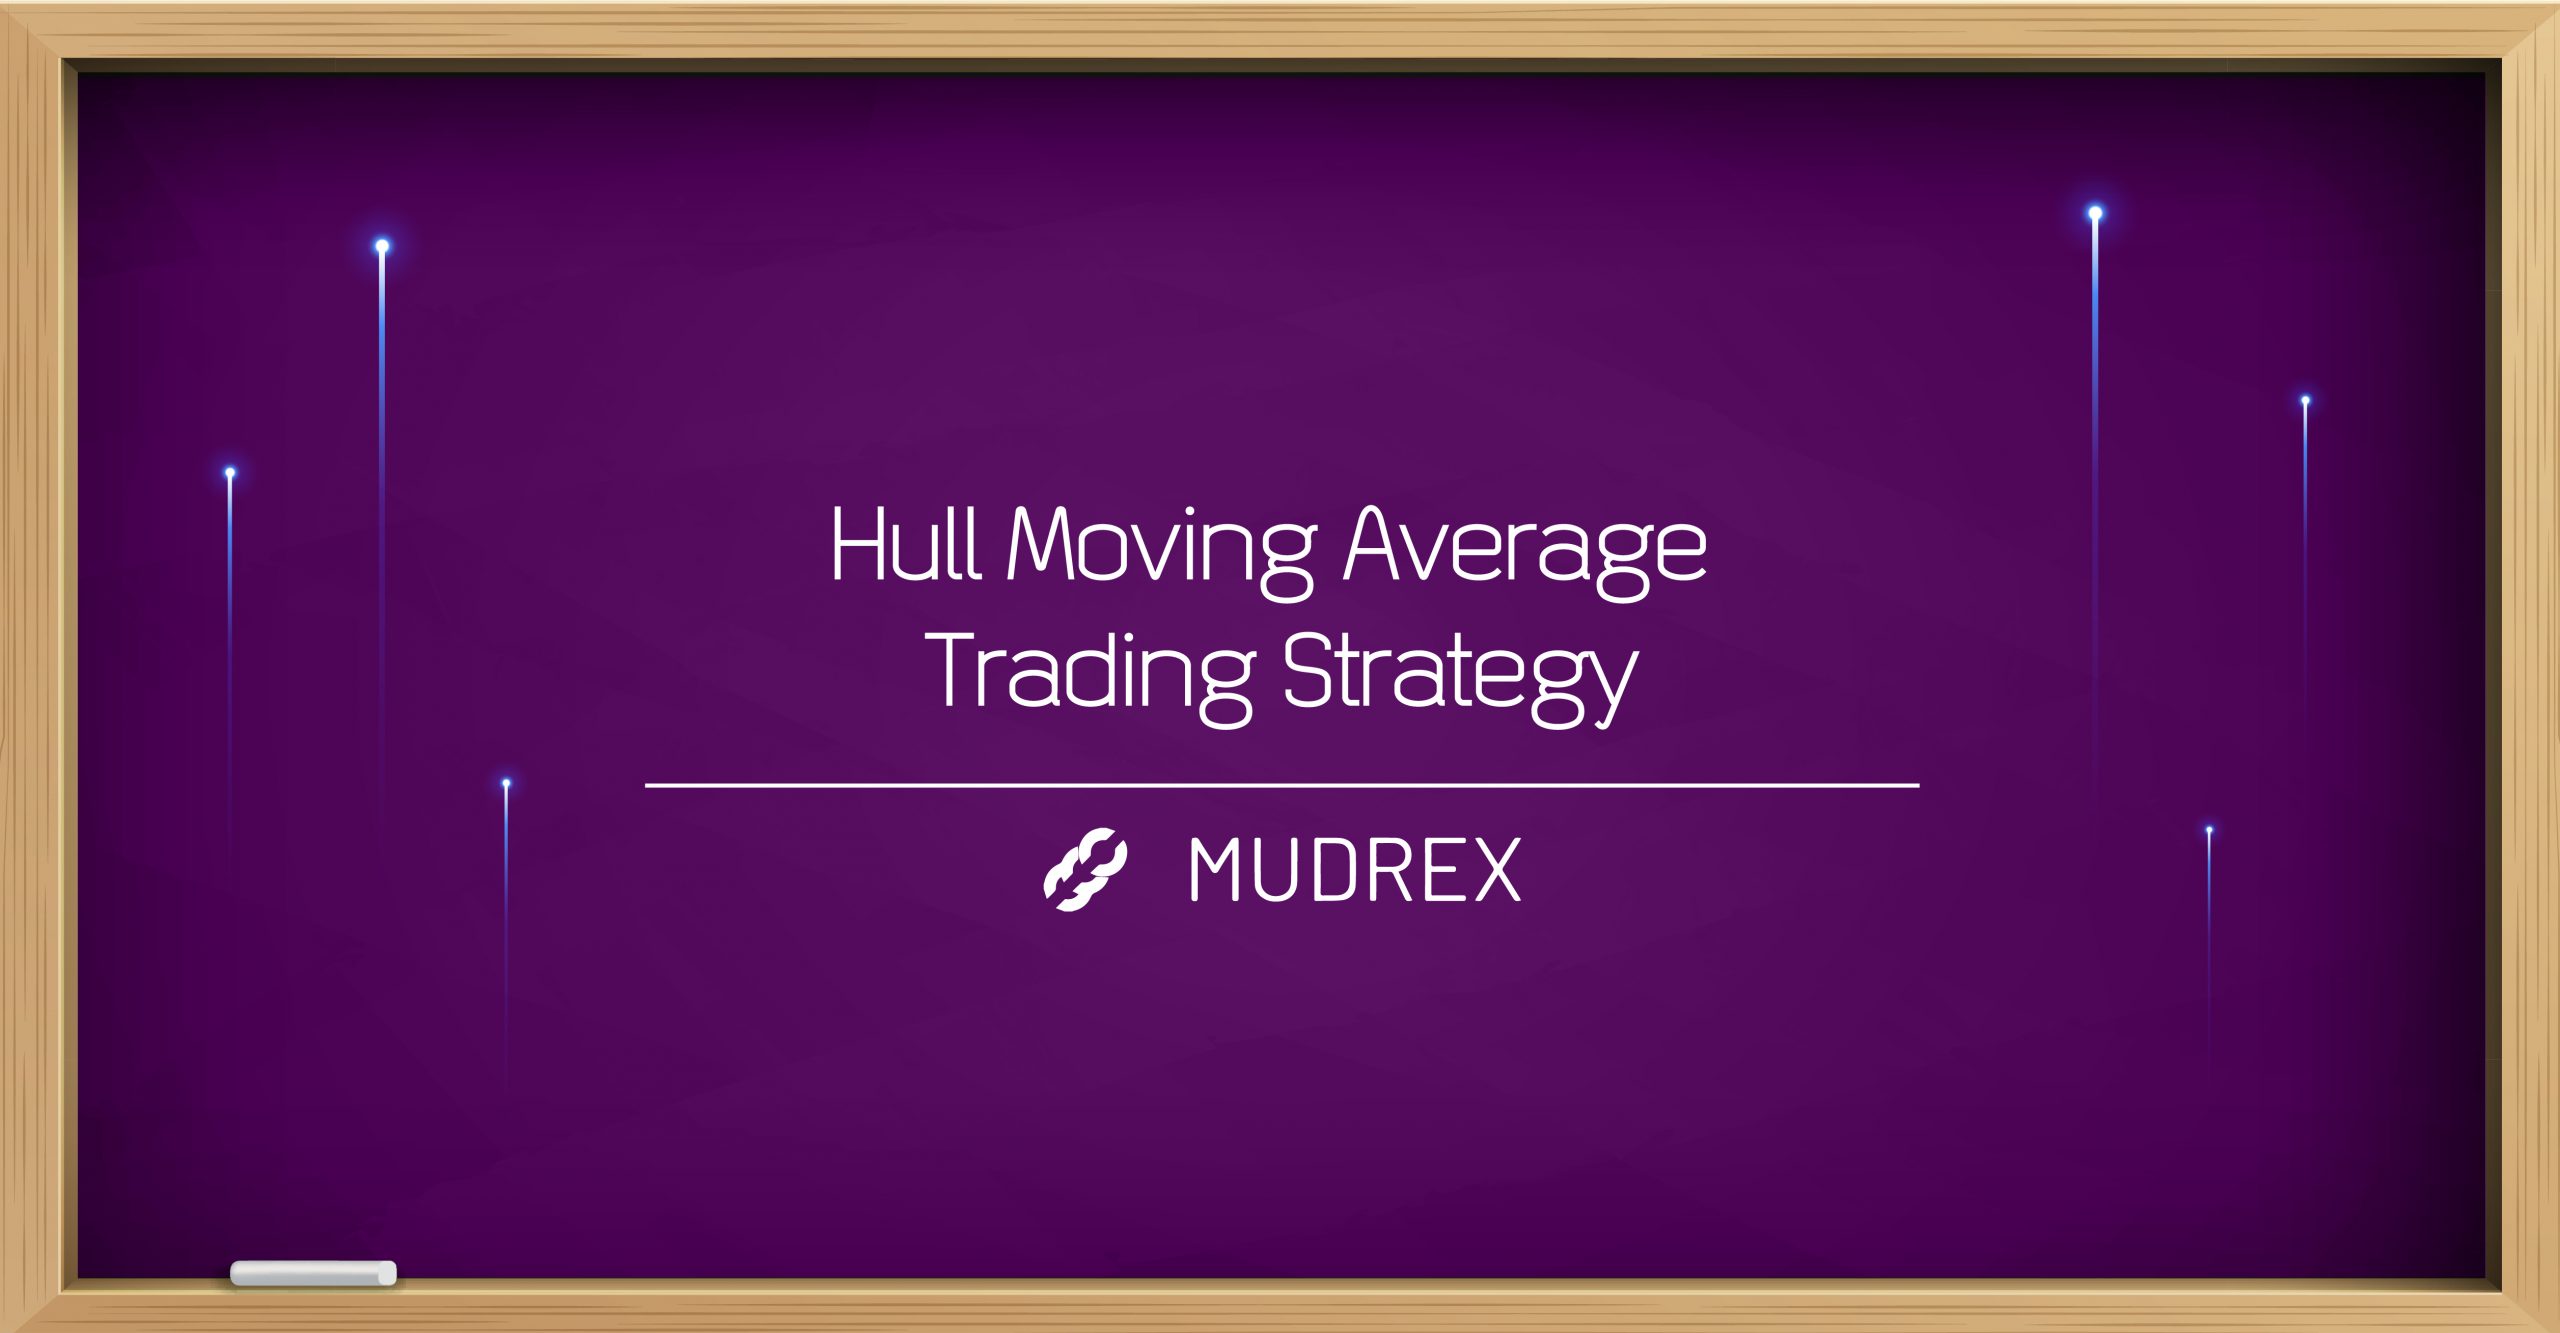 Hull Moving Average Trading Strategy